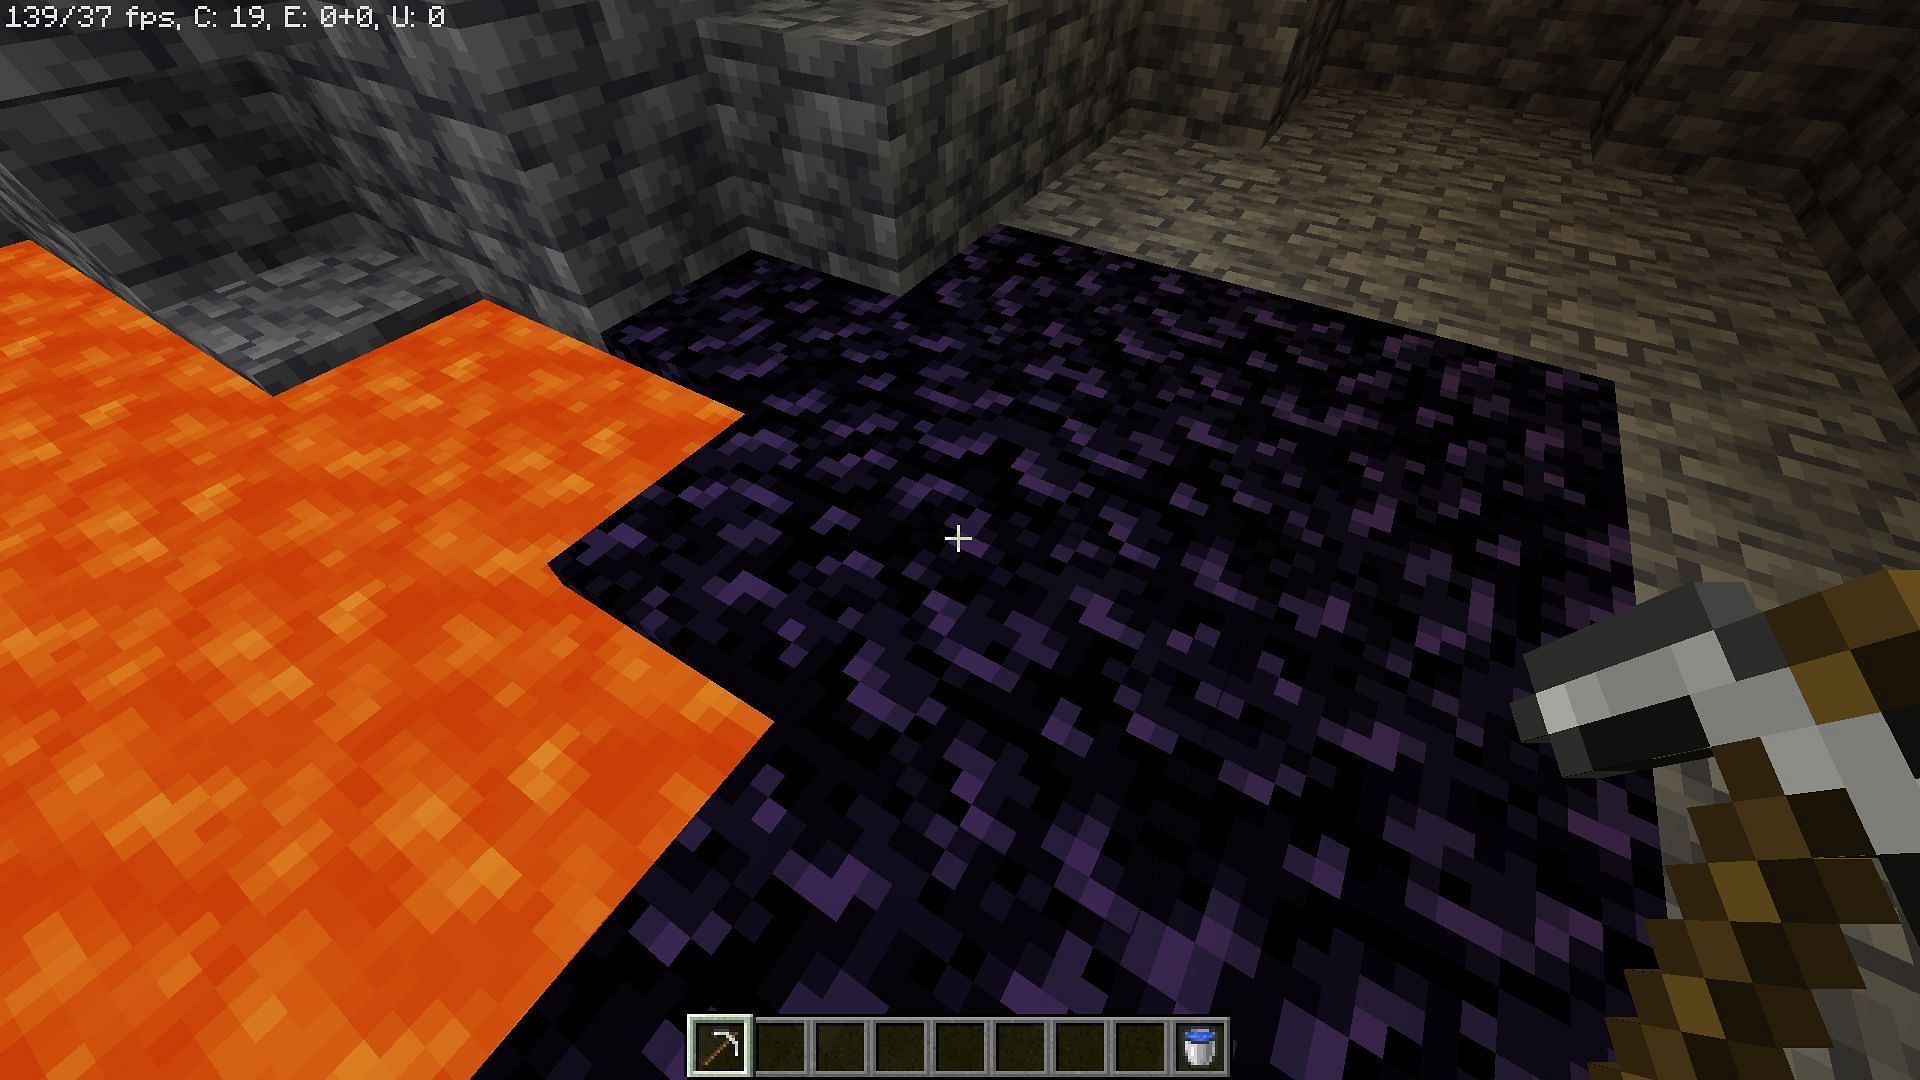 Obsidian blocks can be placed between creepers to survive their explosion in Minecraft (Image via Mojang)